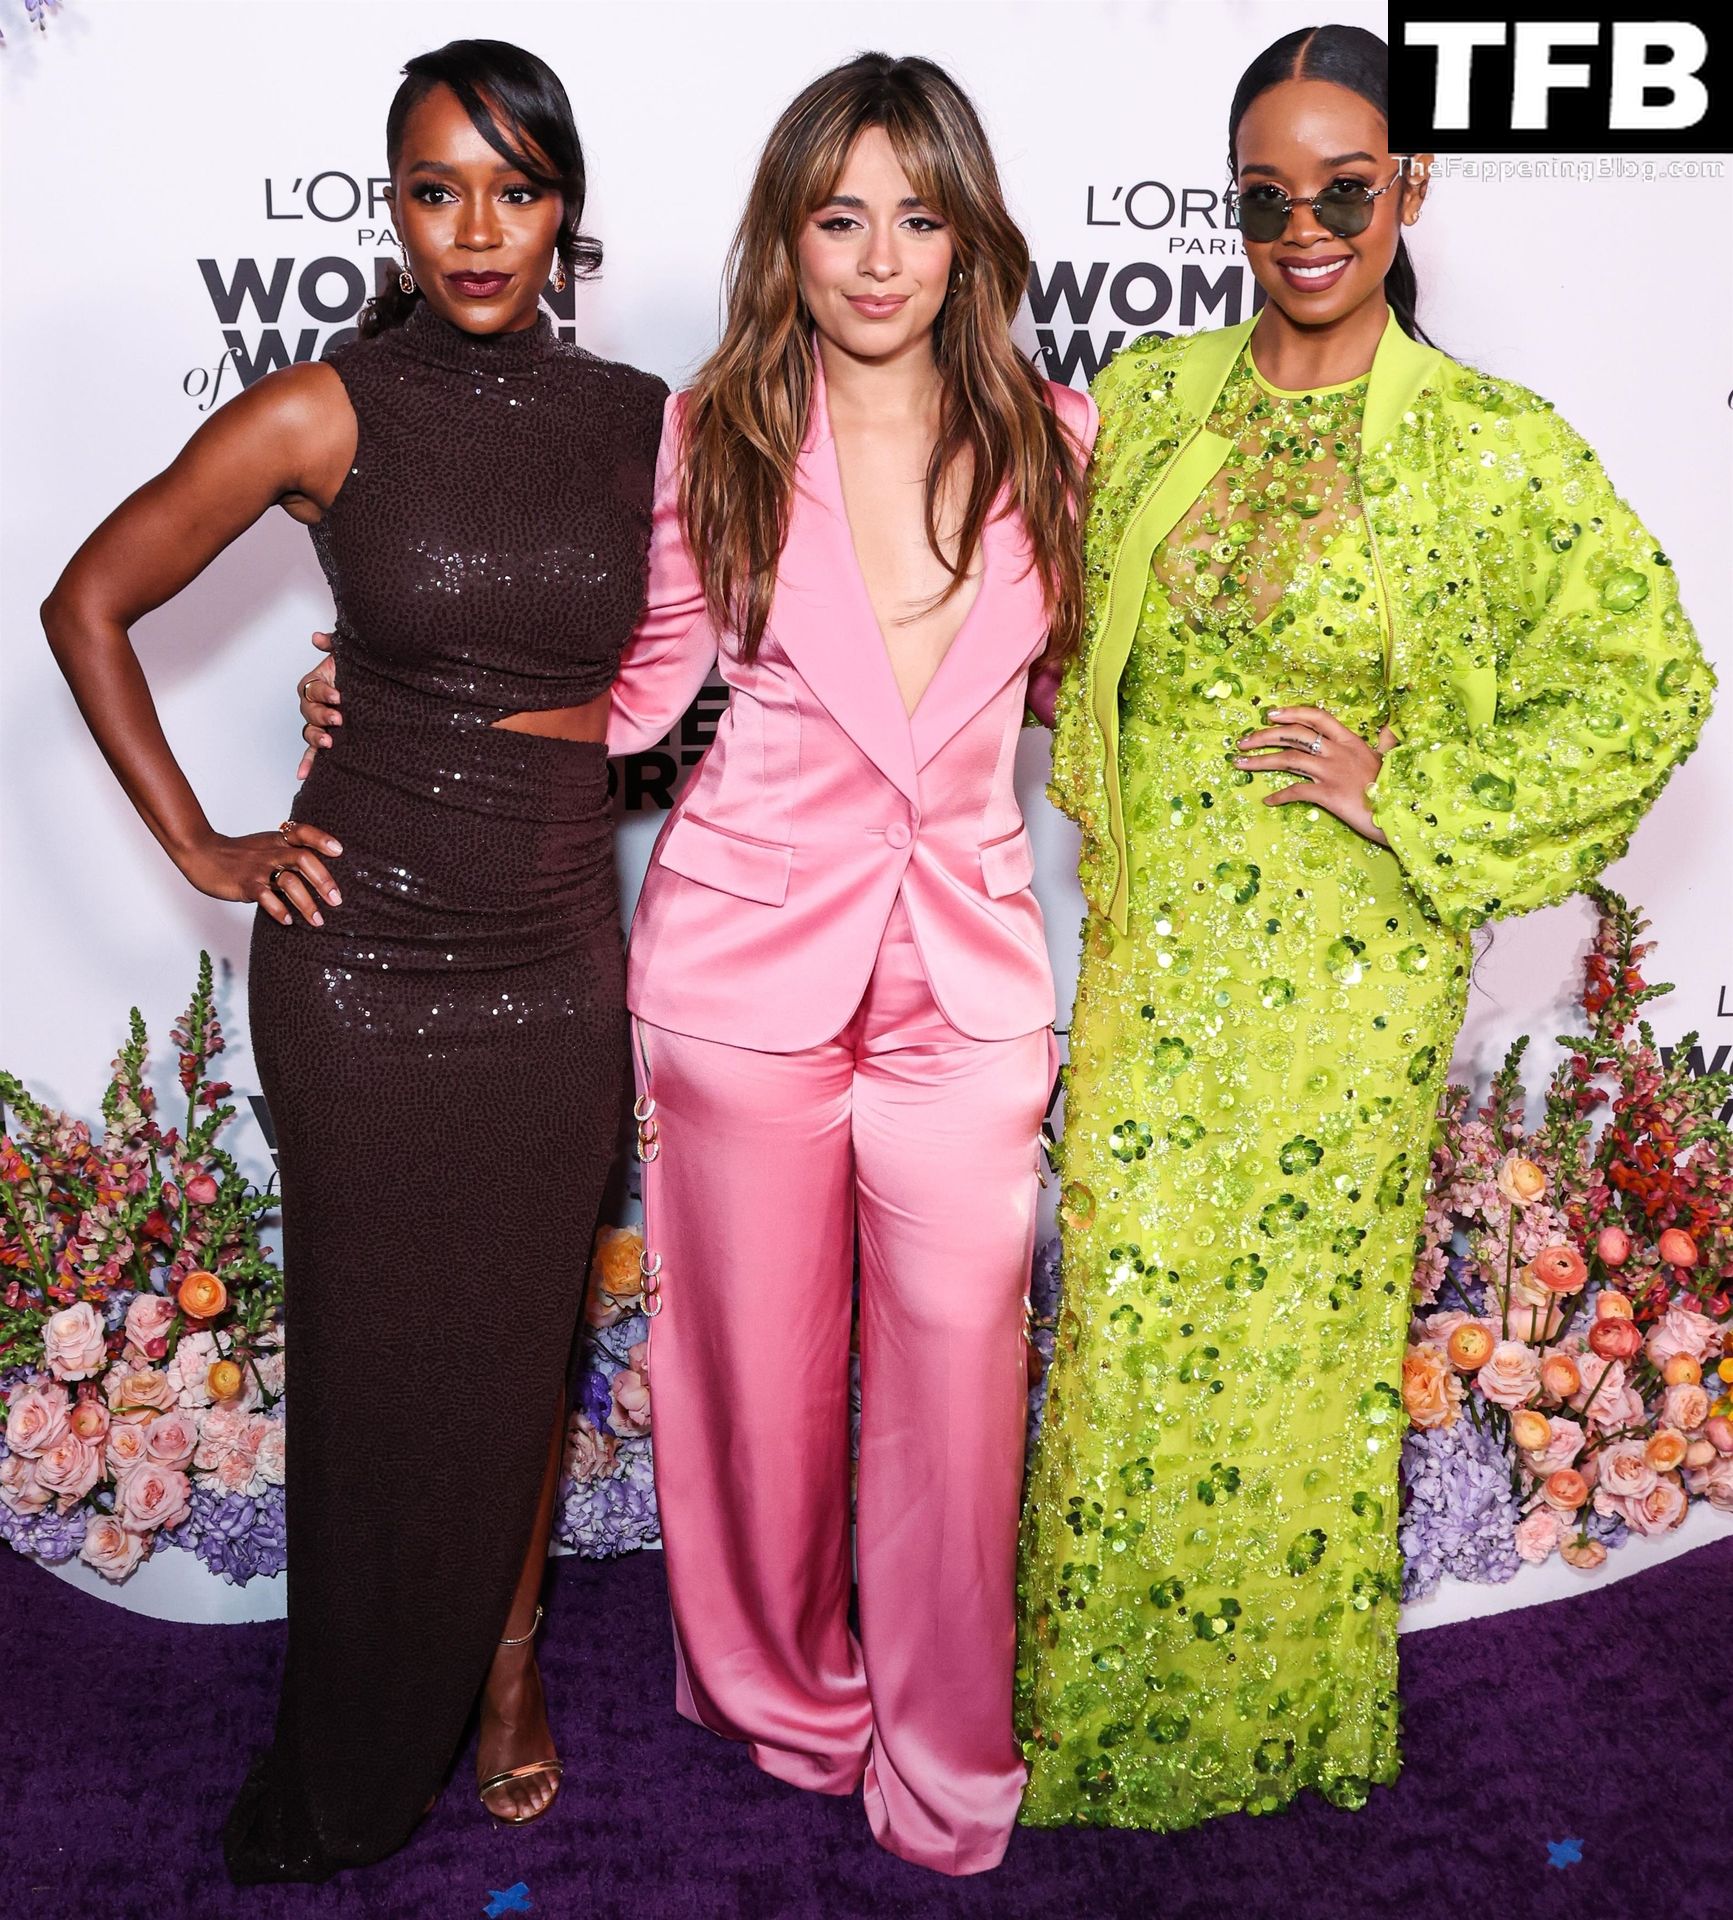 Camila Cabello Looks Hot in Pink at L’Oreal Paris’ Women Of Worth Celebration in LA (50 Photos)